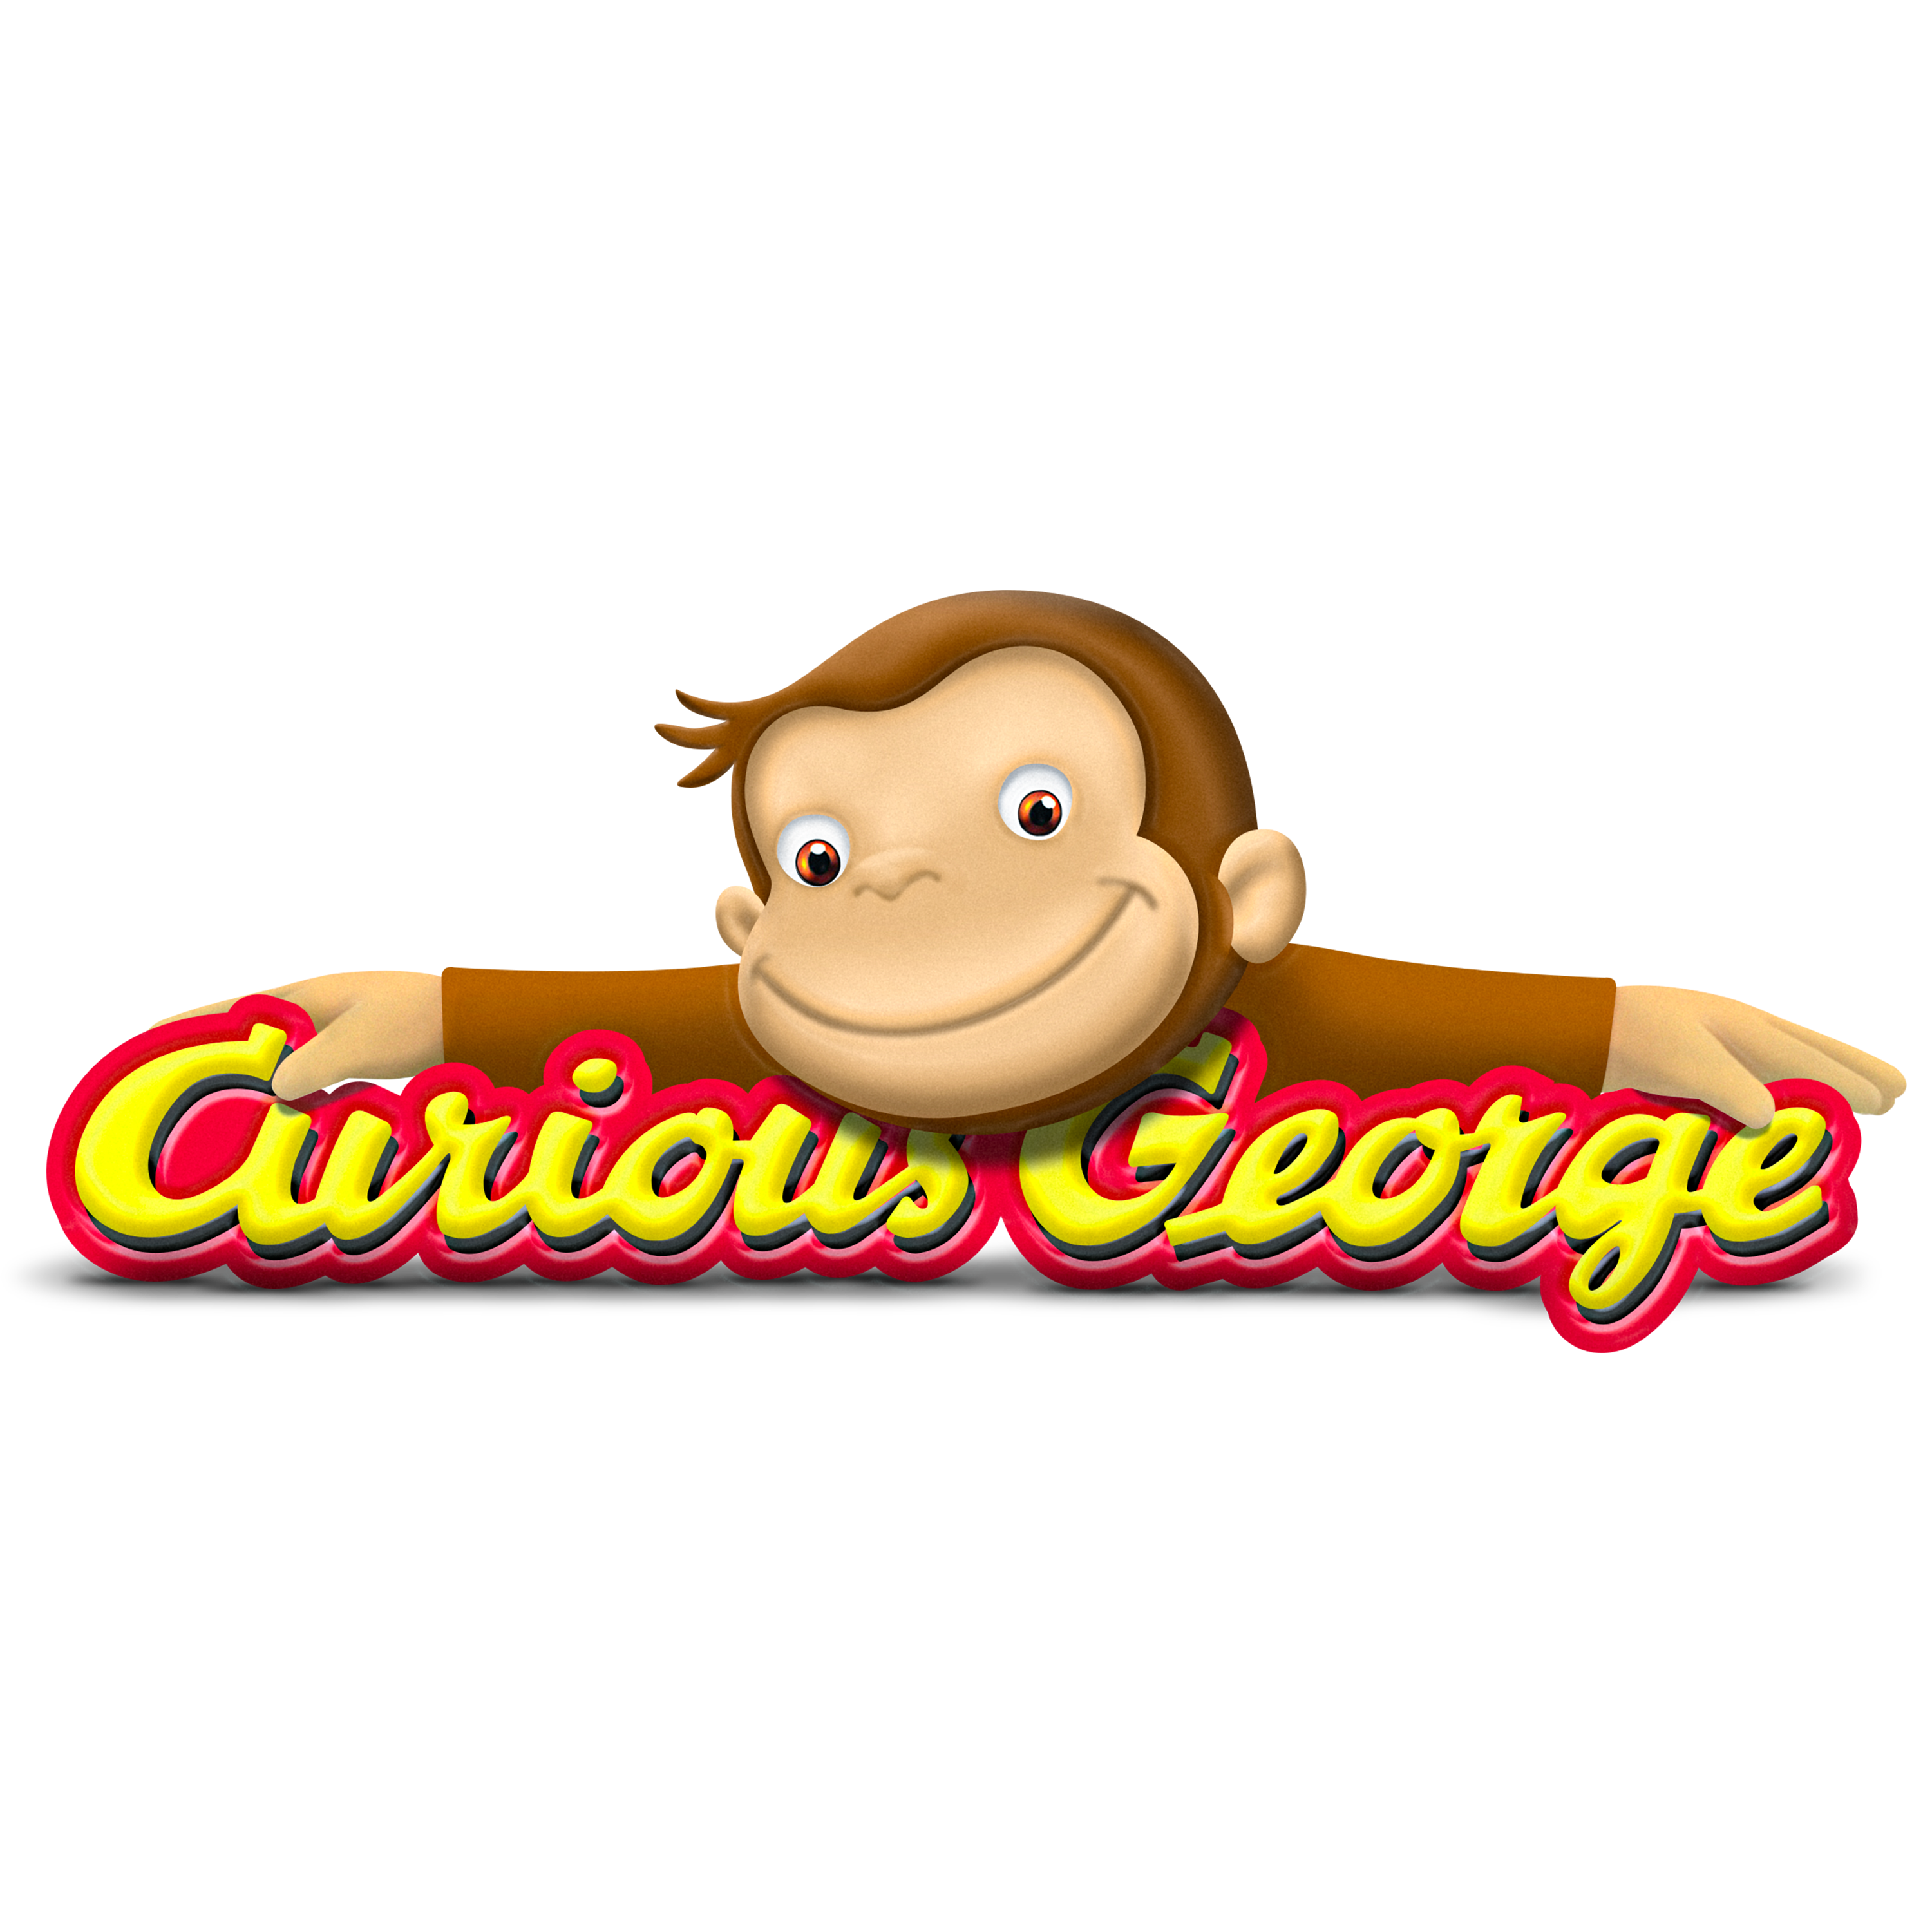 Official Curious George T-Shirts, Merchandise & Apparel